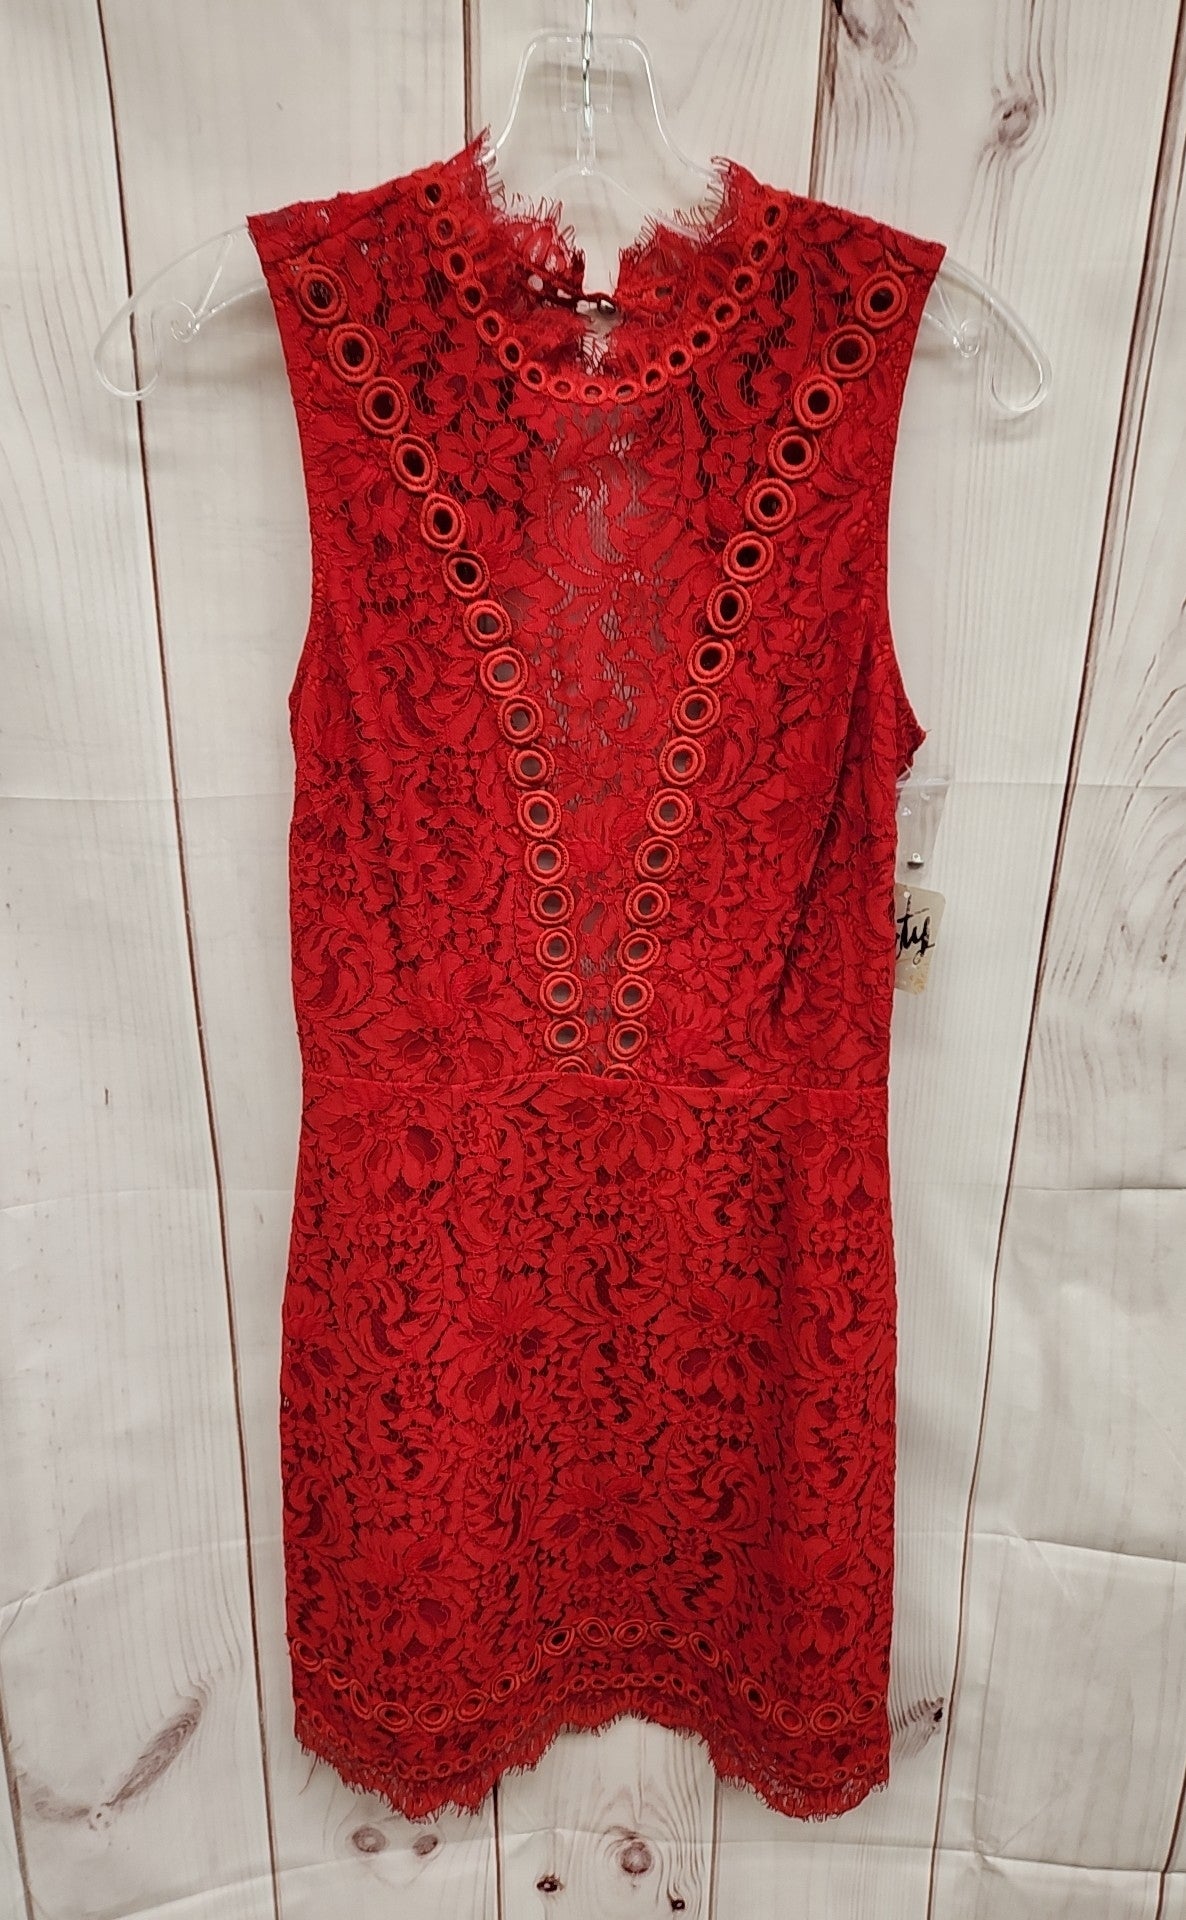 Free People Women's Size XS Red Dress NWT